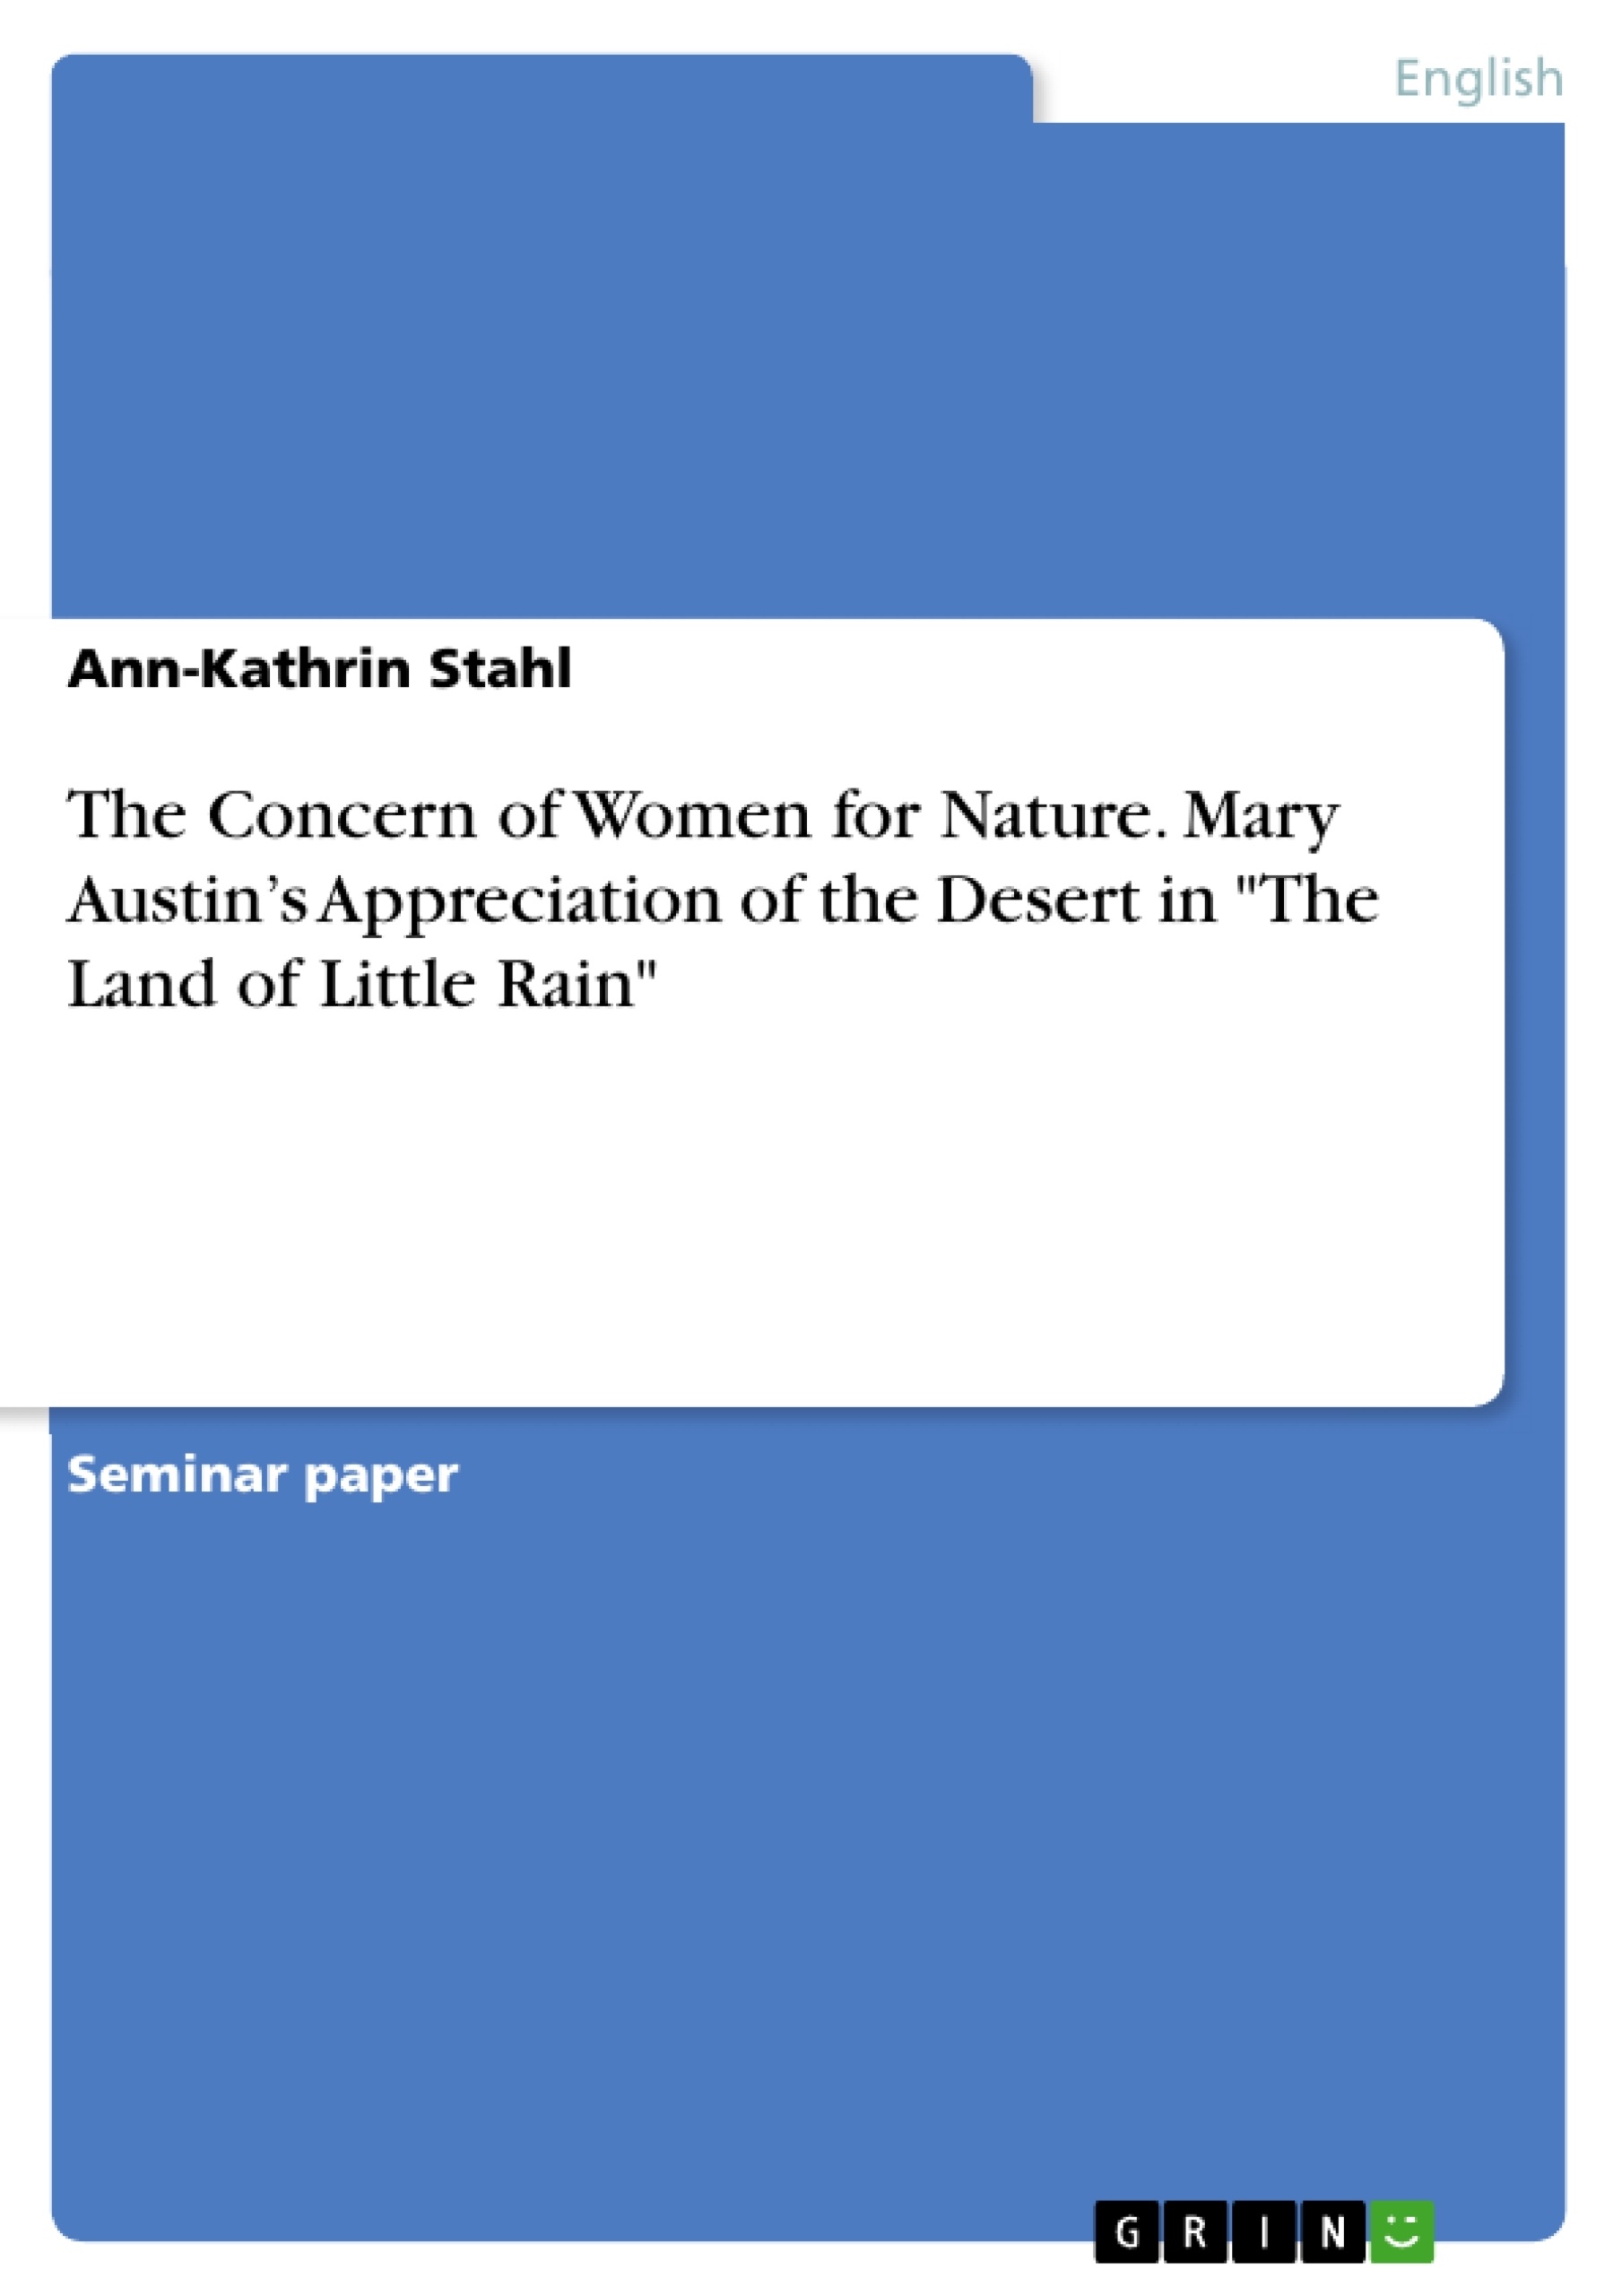 Titre: The Concern of Women for Nature. Mary Austin’s Appreciation of the Desert in "The Land of Little Rain"